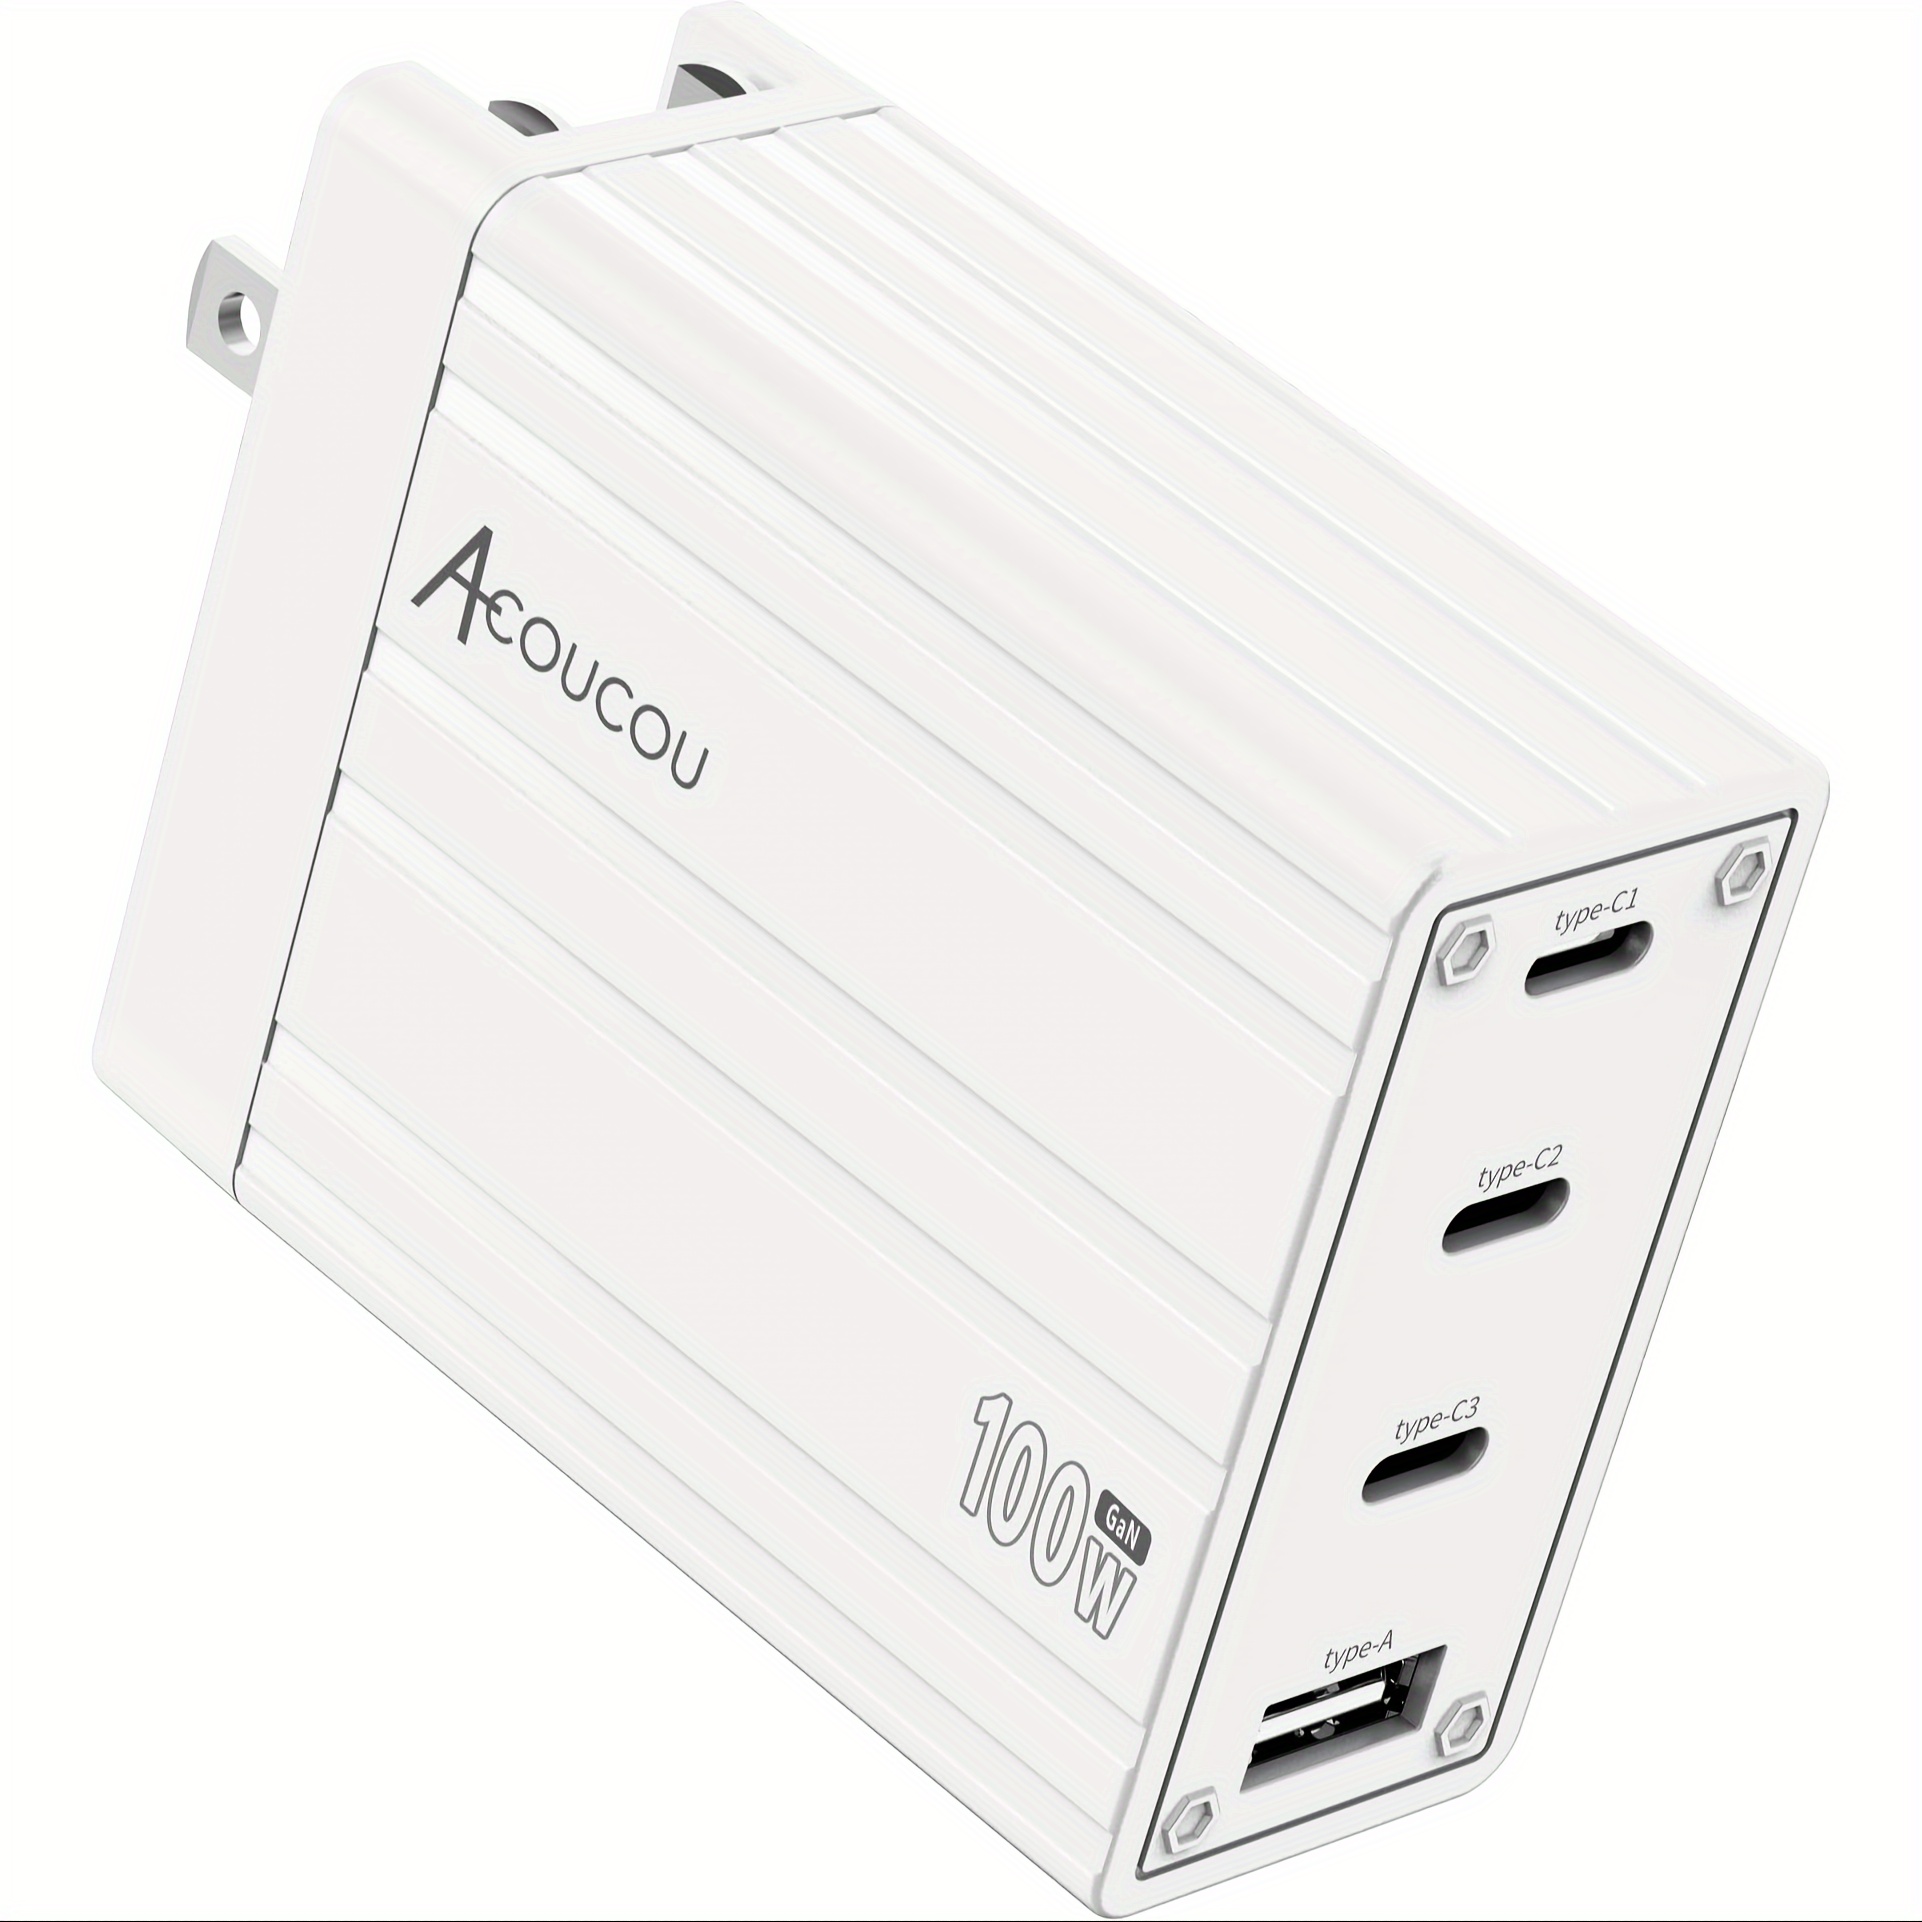 

Acoucou 100w Usb C Charger 4-port Gan Iii Pd&qc 3.0 Type C Charging Block, Multiple Ports Fast Charger For Air/pro, I-pad Samsung Galaxy Etc Phone&laptop, 100 Watt Universal Charger